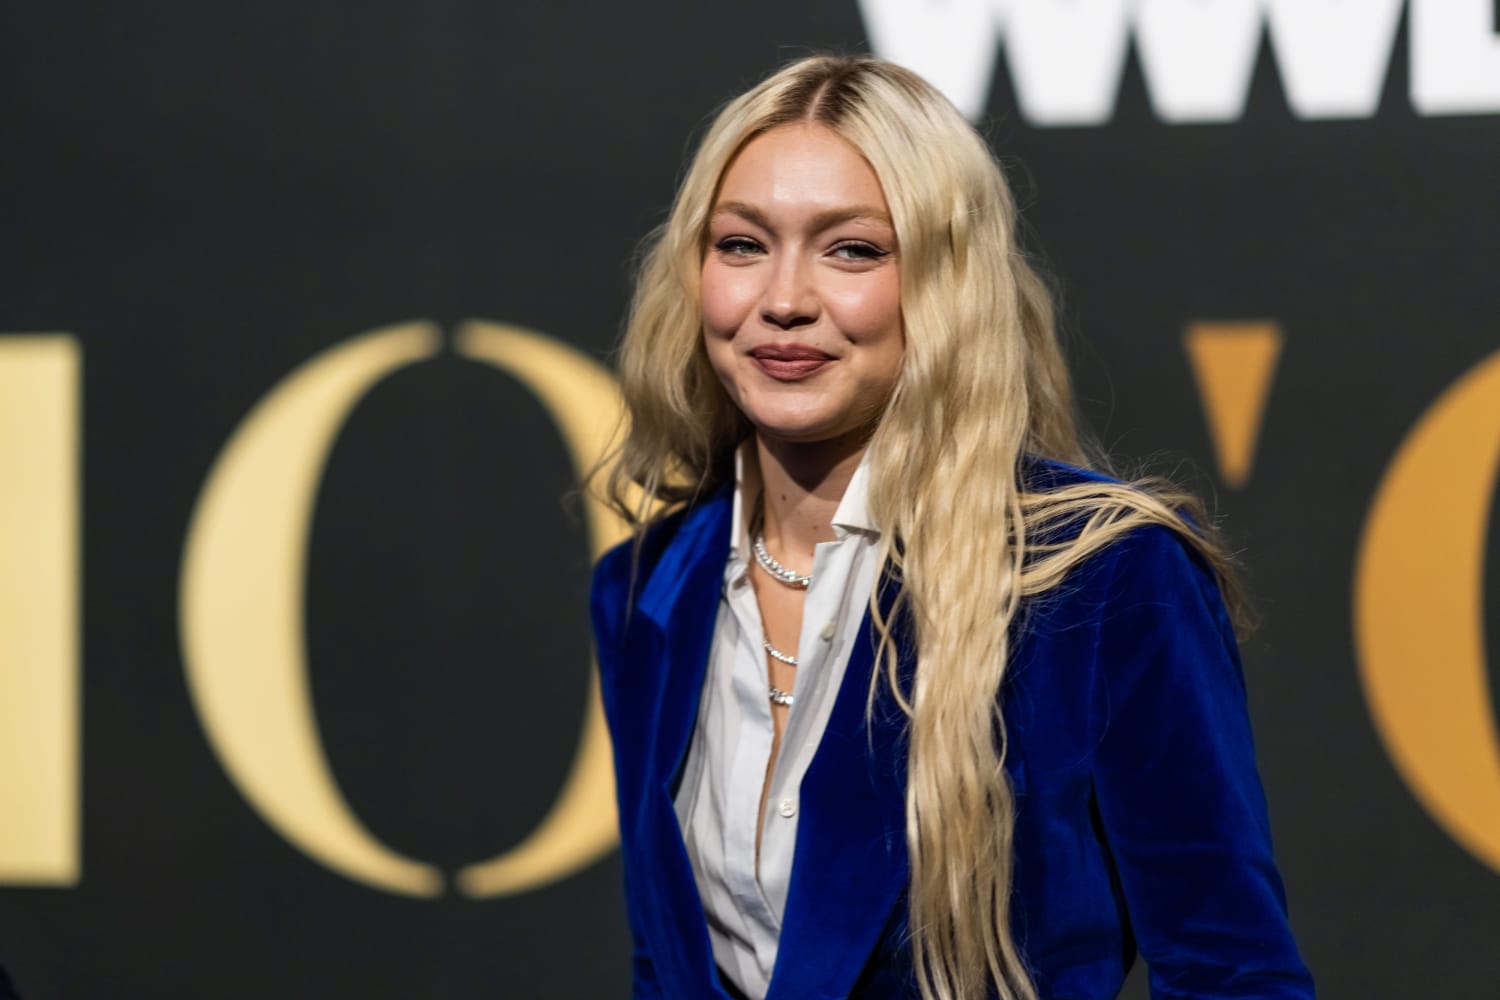 Gigi Hadid Shares Birth Story and Plans for Raising Daughter Khai in 'Vogue